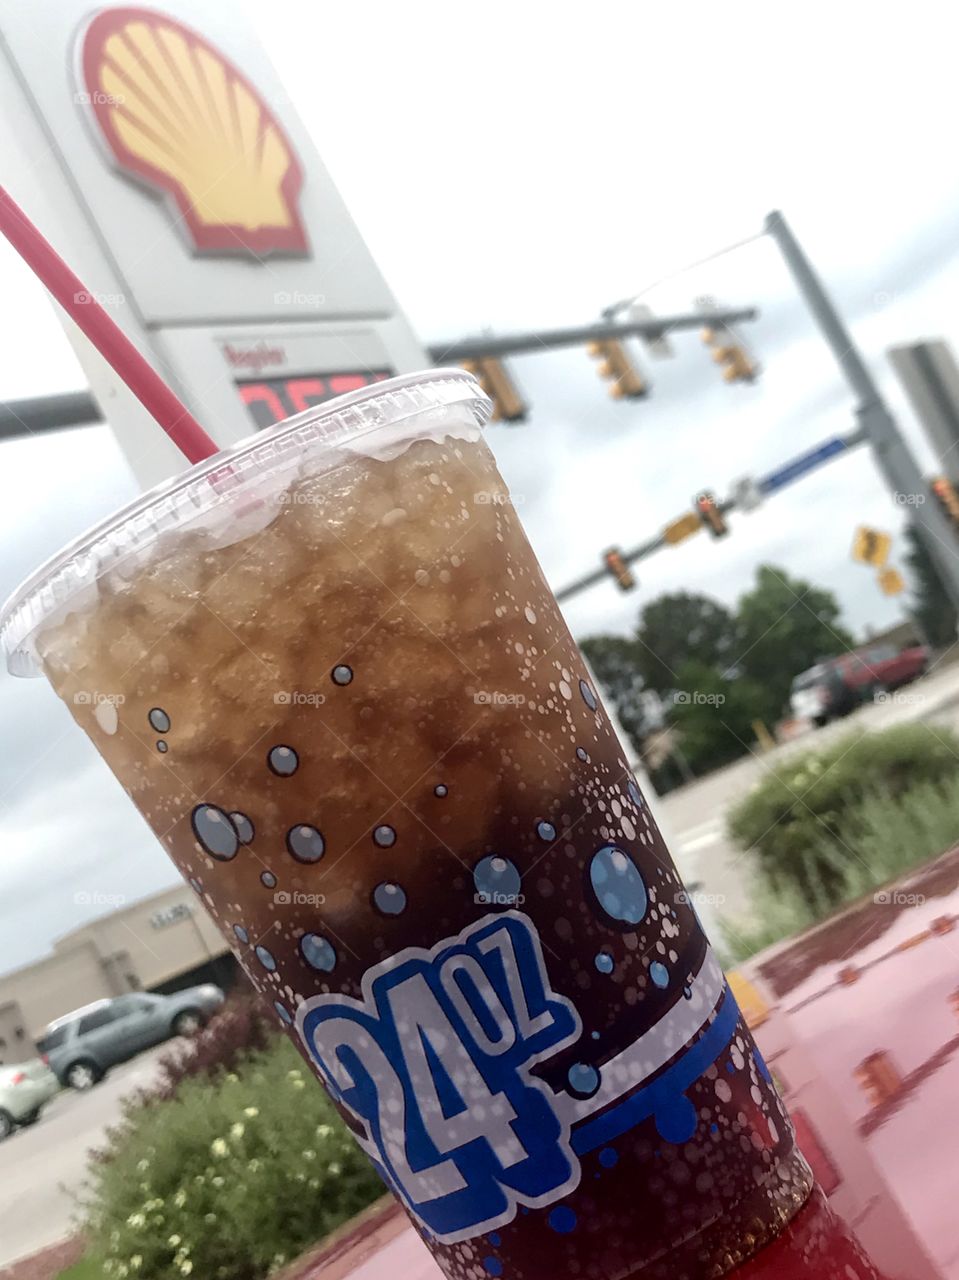 Refreshing cold cola at Cherry Knolls shopping center!